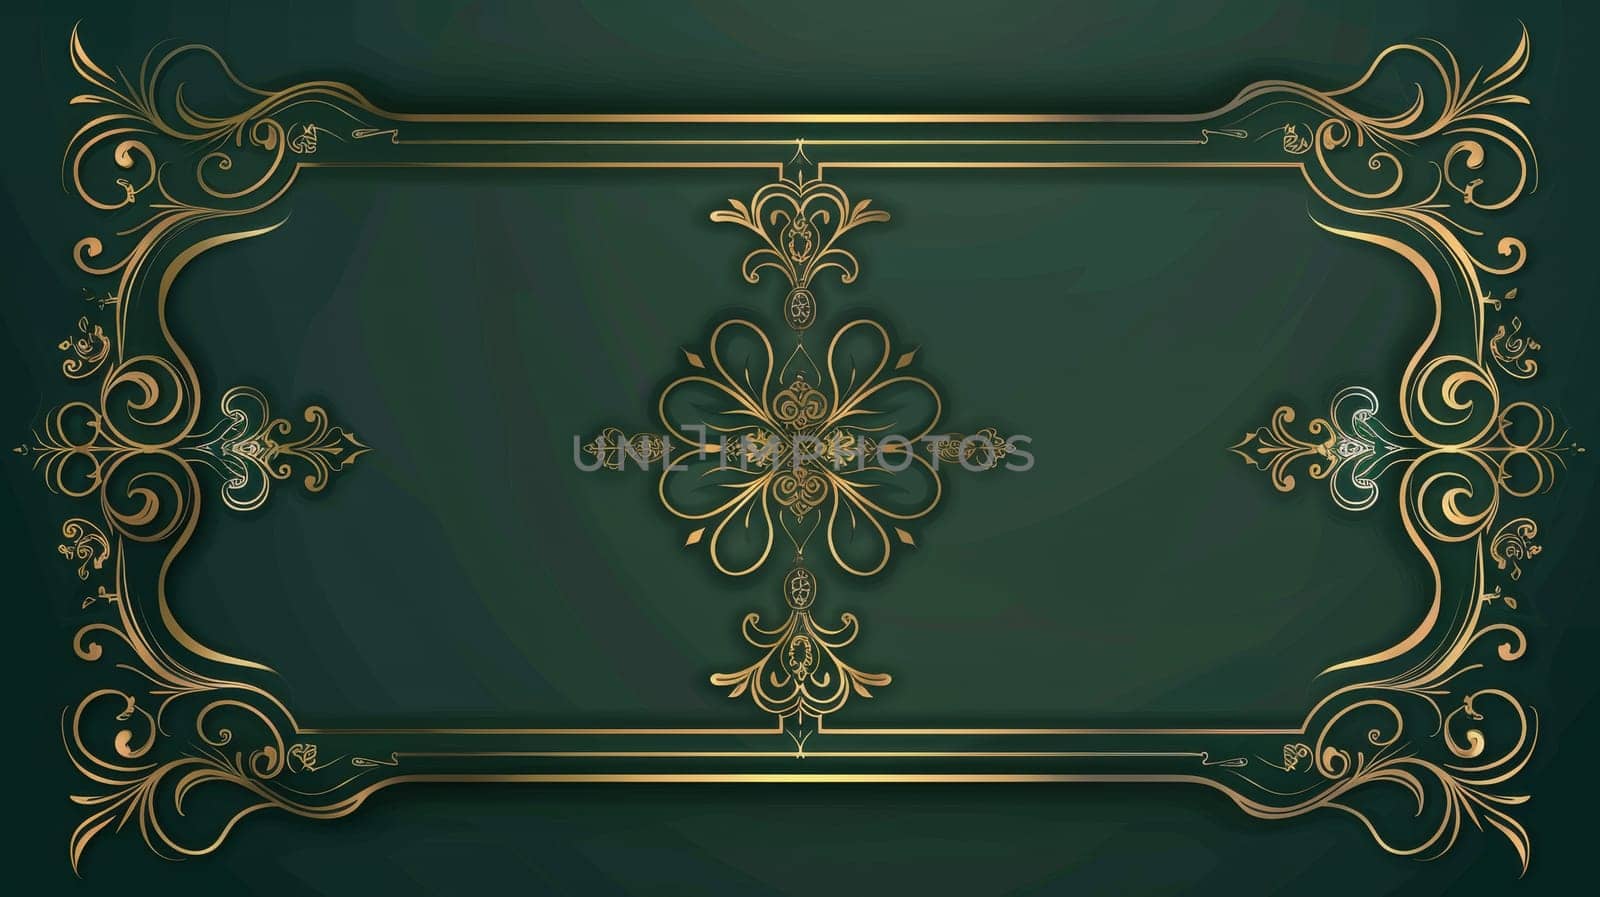 Art nouveau classic antique design on dark green background. The best illustration design for galas, grand openings, art deco events. by Andrei_01